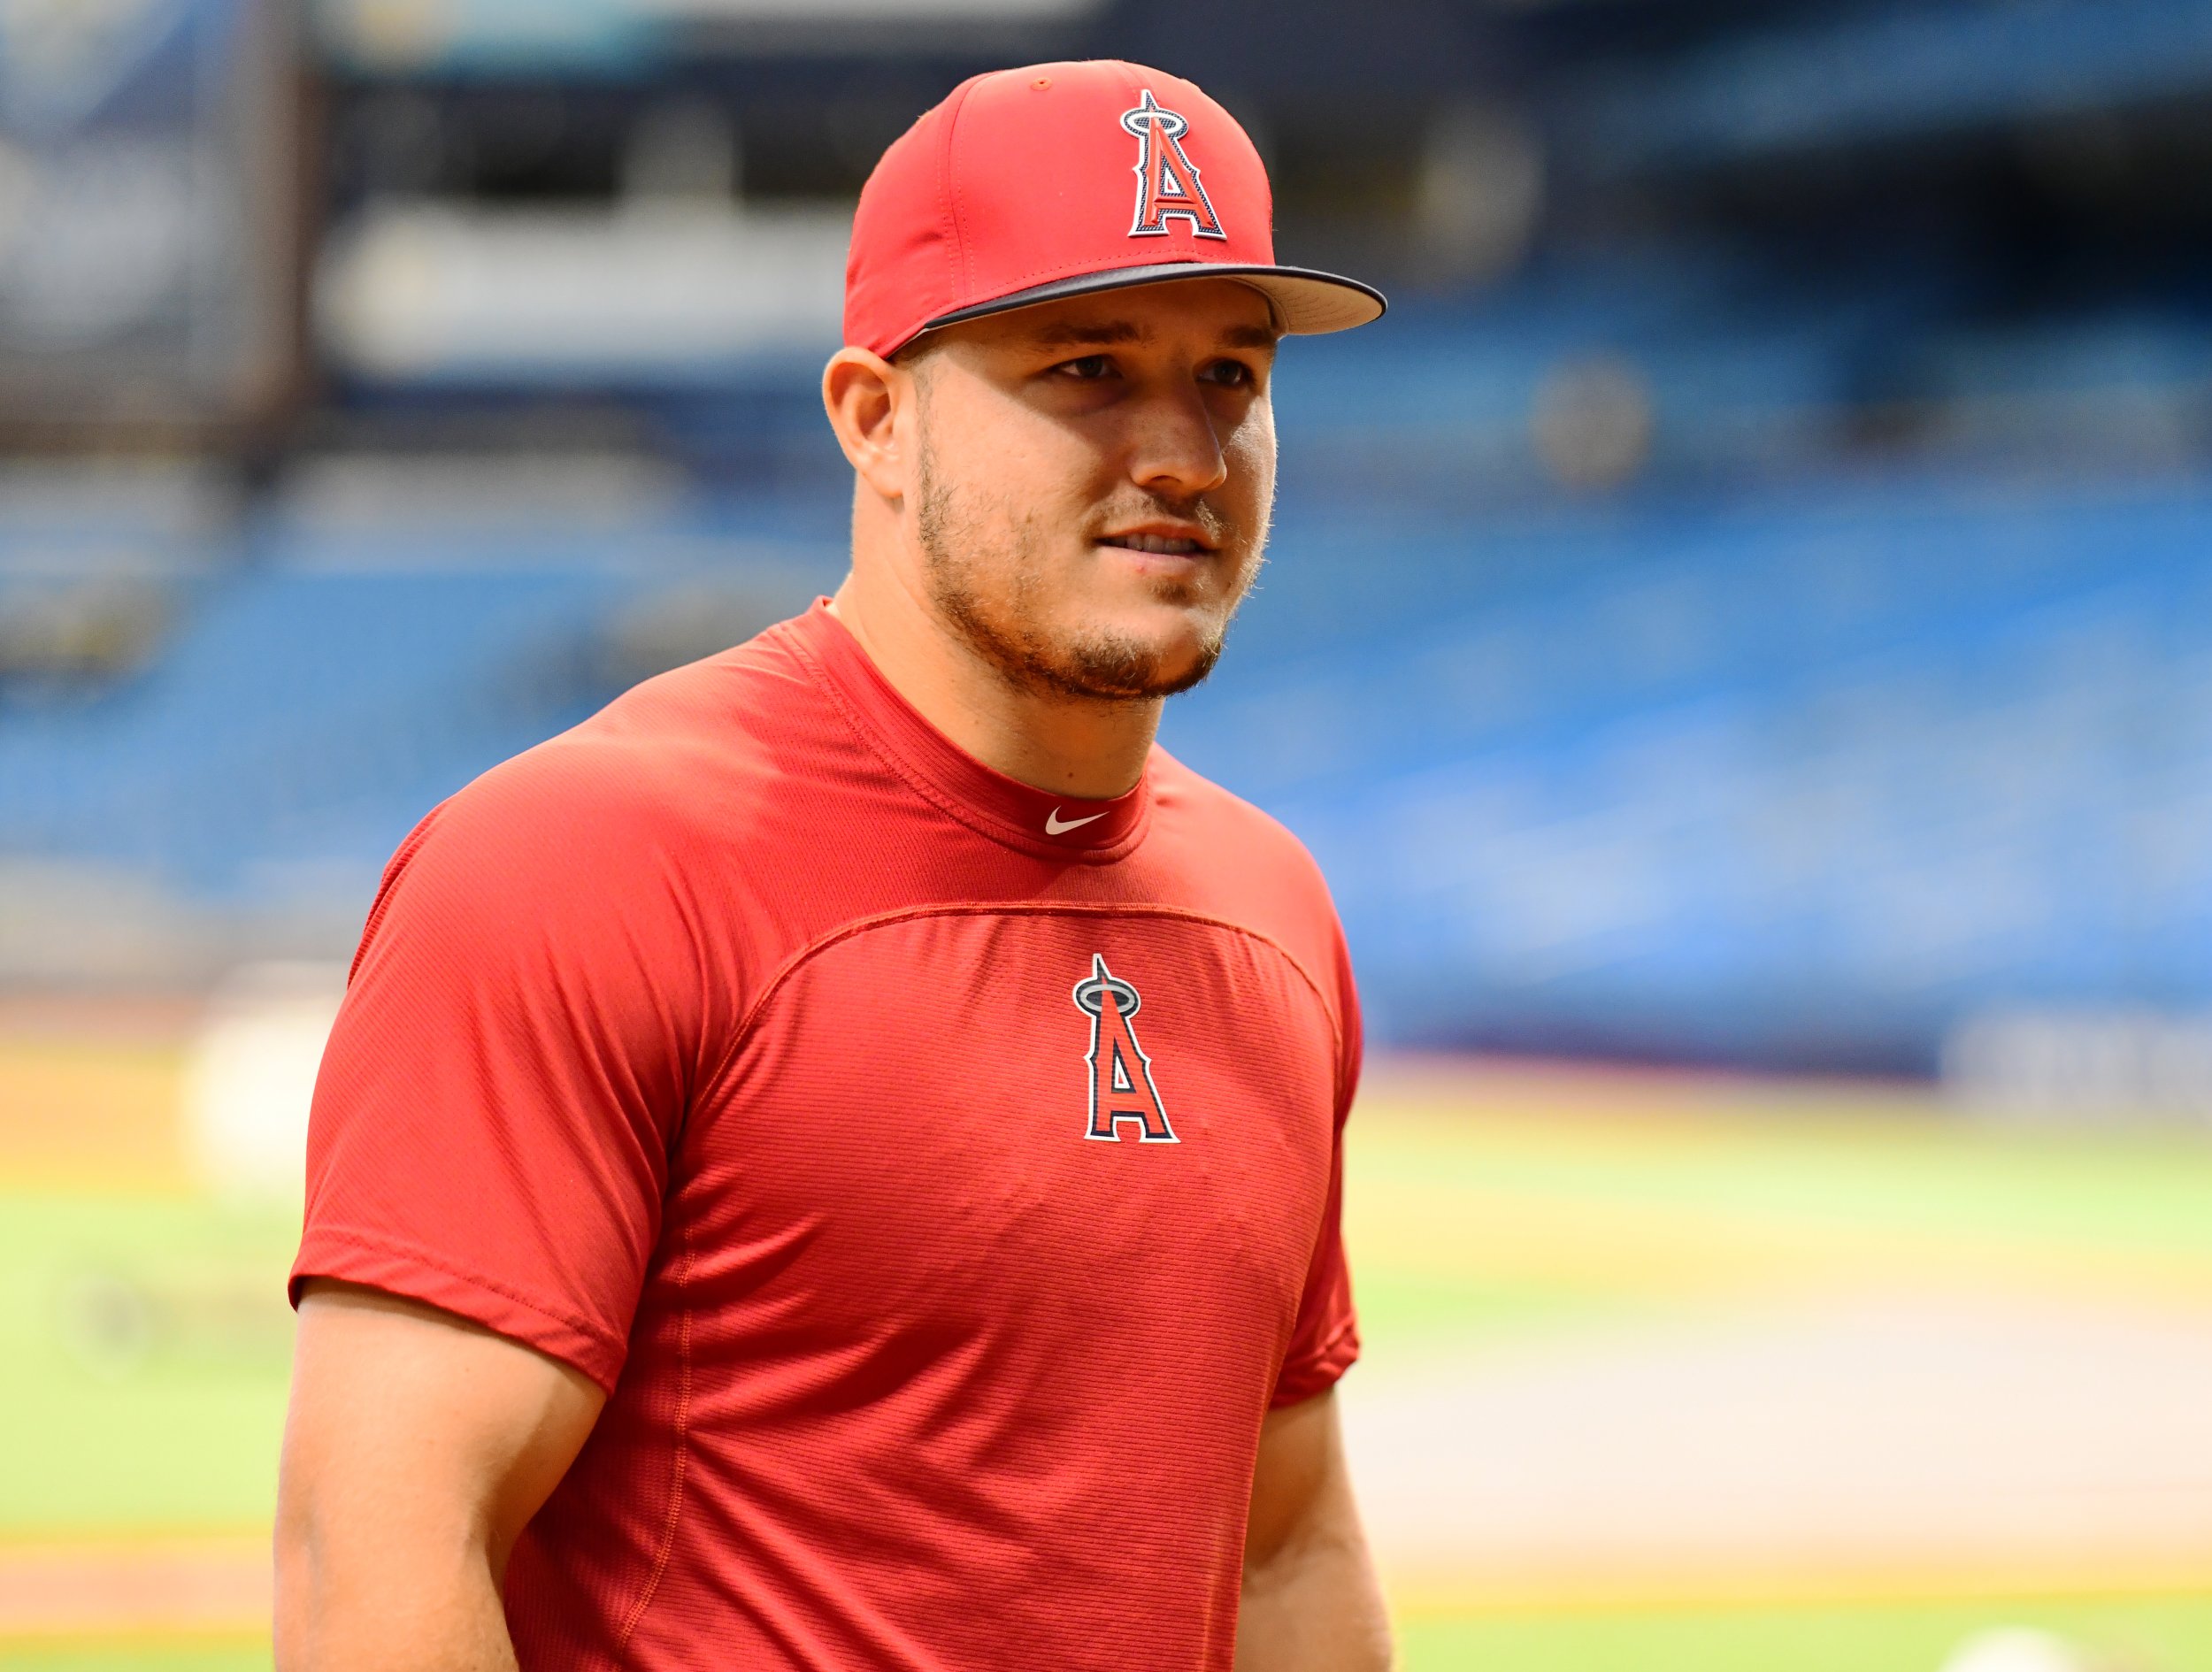 Mike Trout, Gerrit Cole, and other top players will earn at least